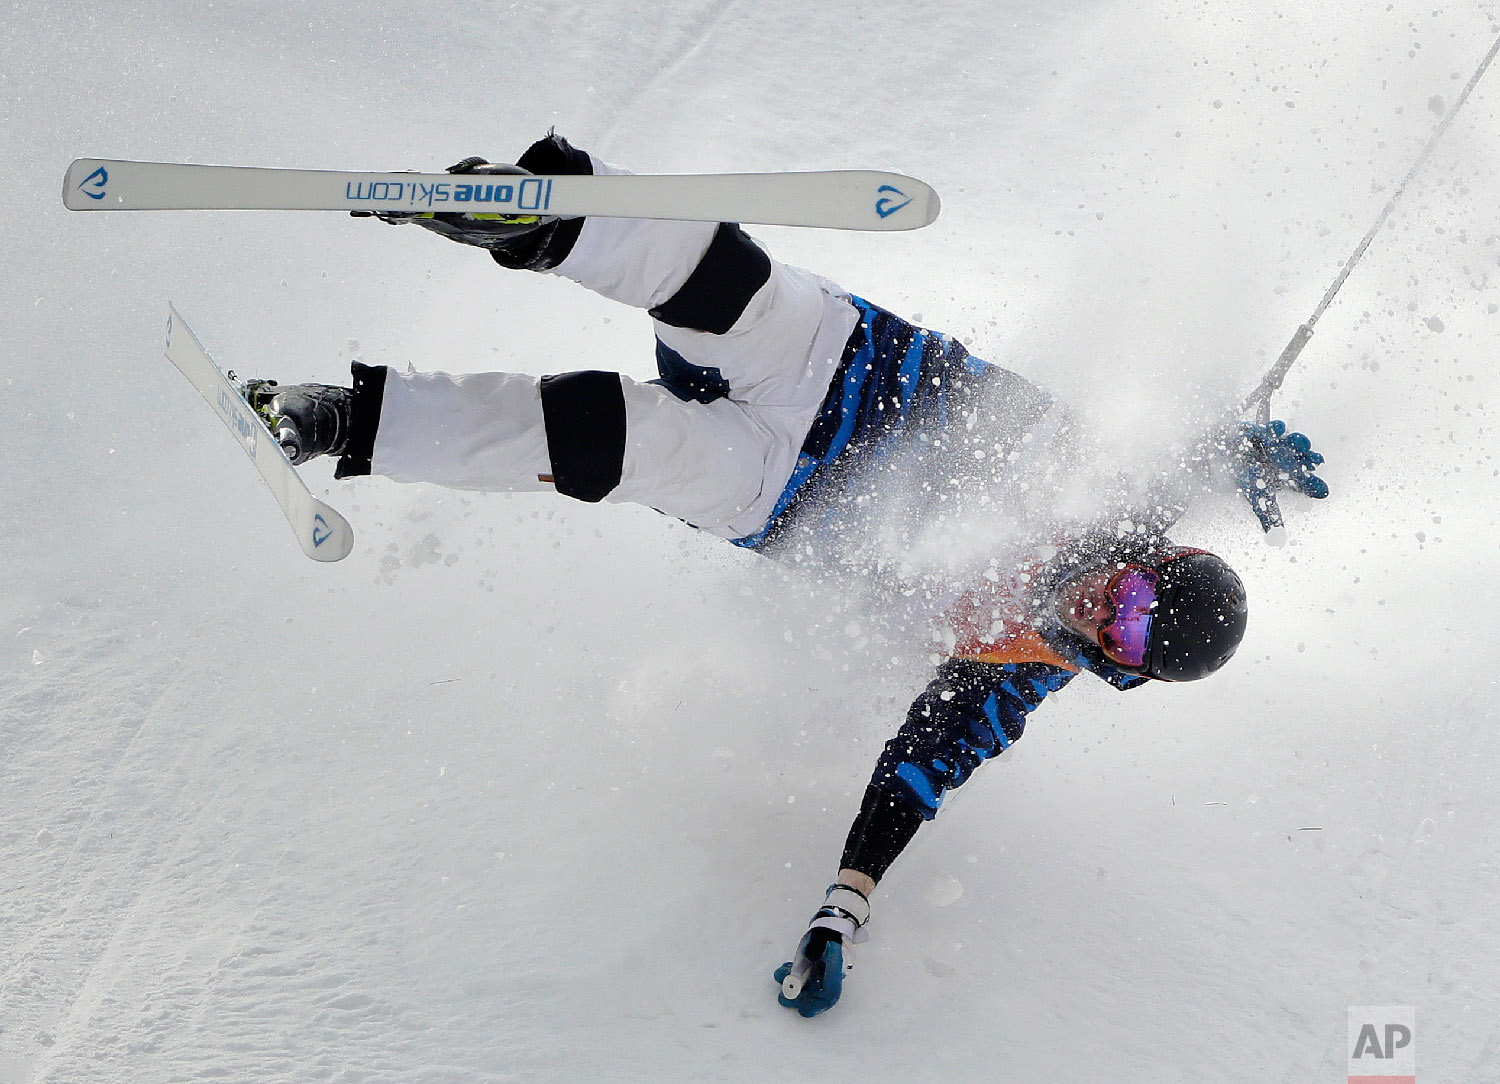  Jussi Penttala, of Finland, crashes during the men's moguls qualifying at Phoenix Snow Park at the 2018 Winter Olympics in Pyeongchang, South Korea, Friday, Feb. 9, 2018. (AP Photo/Gregory Bull) 